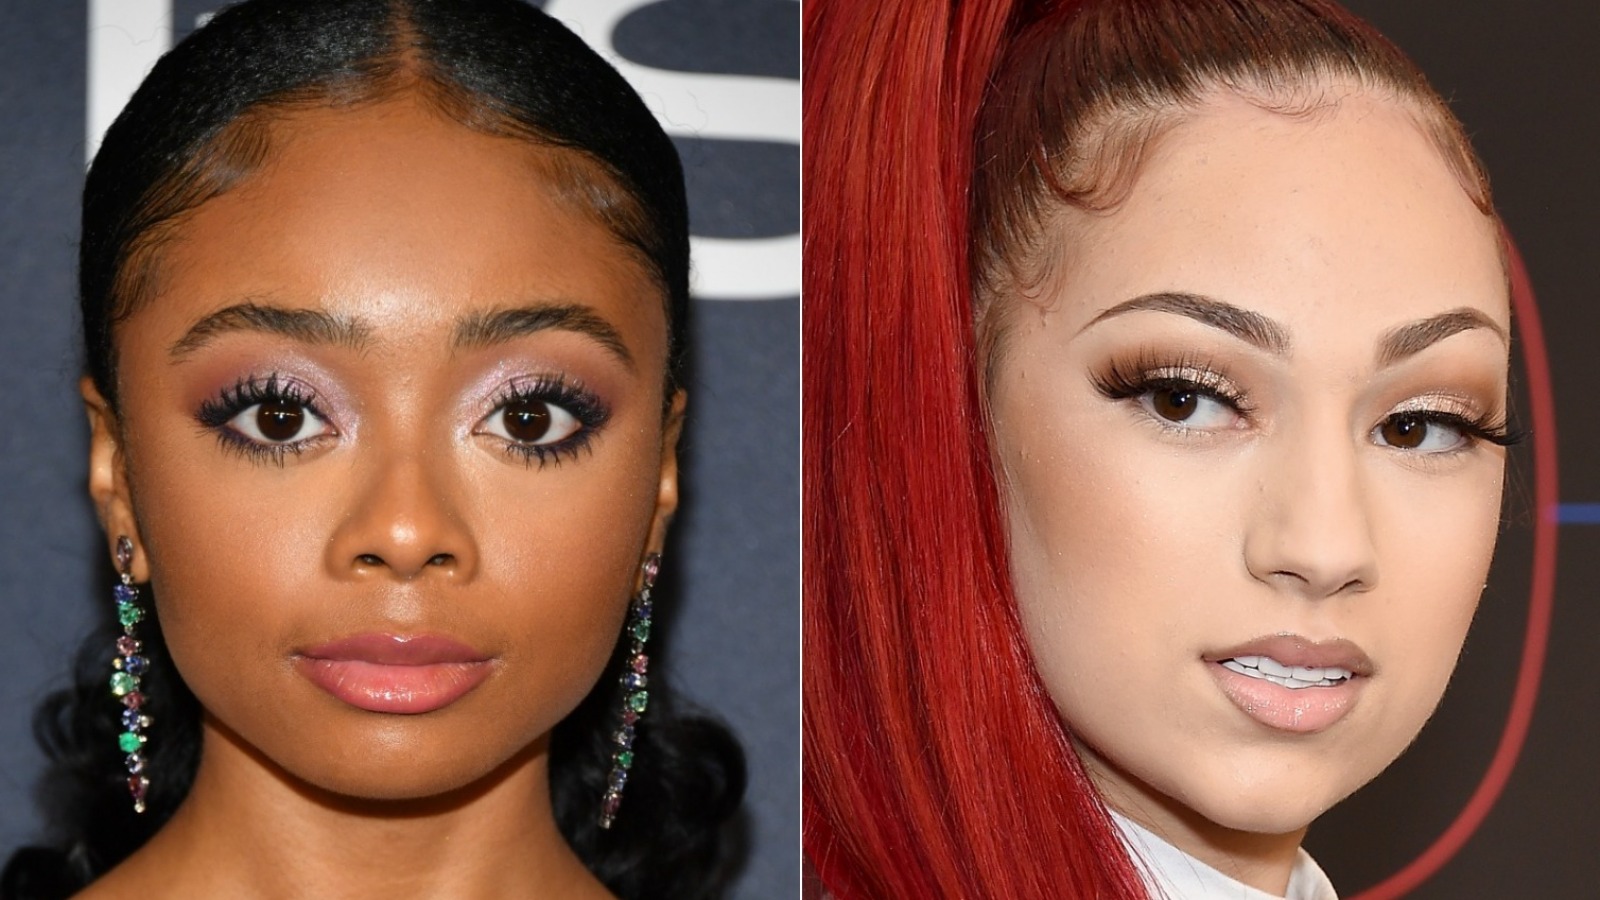 The unsaid truth of Skai Jackson's feud with Bhad Bhabie